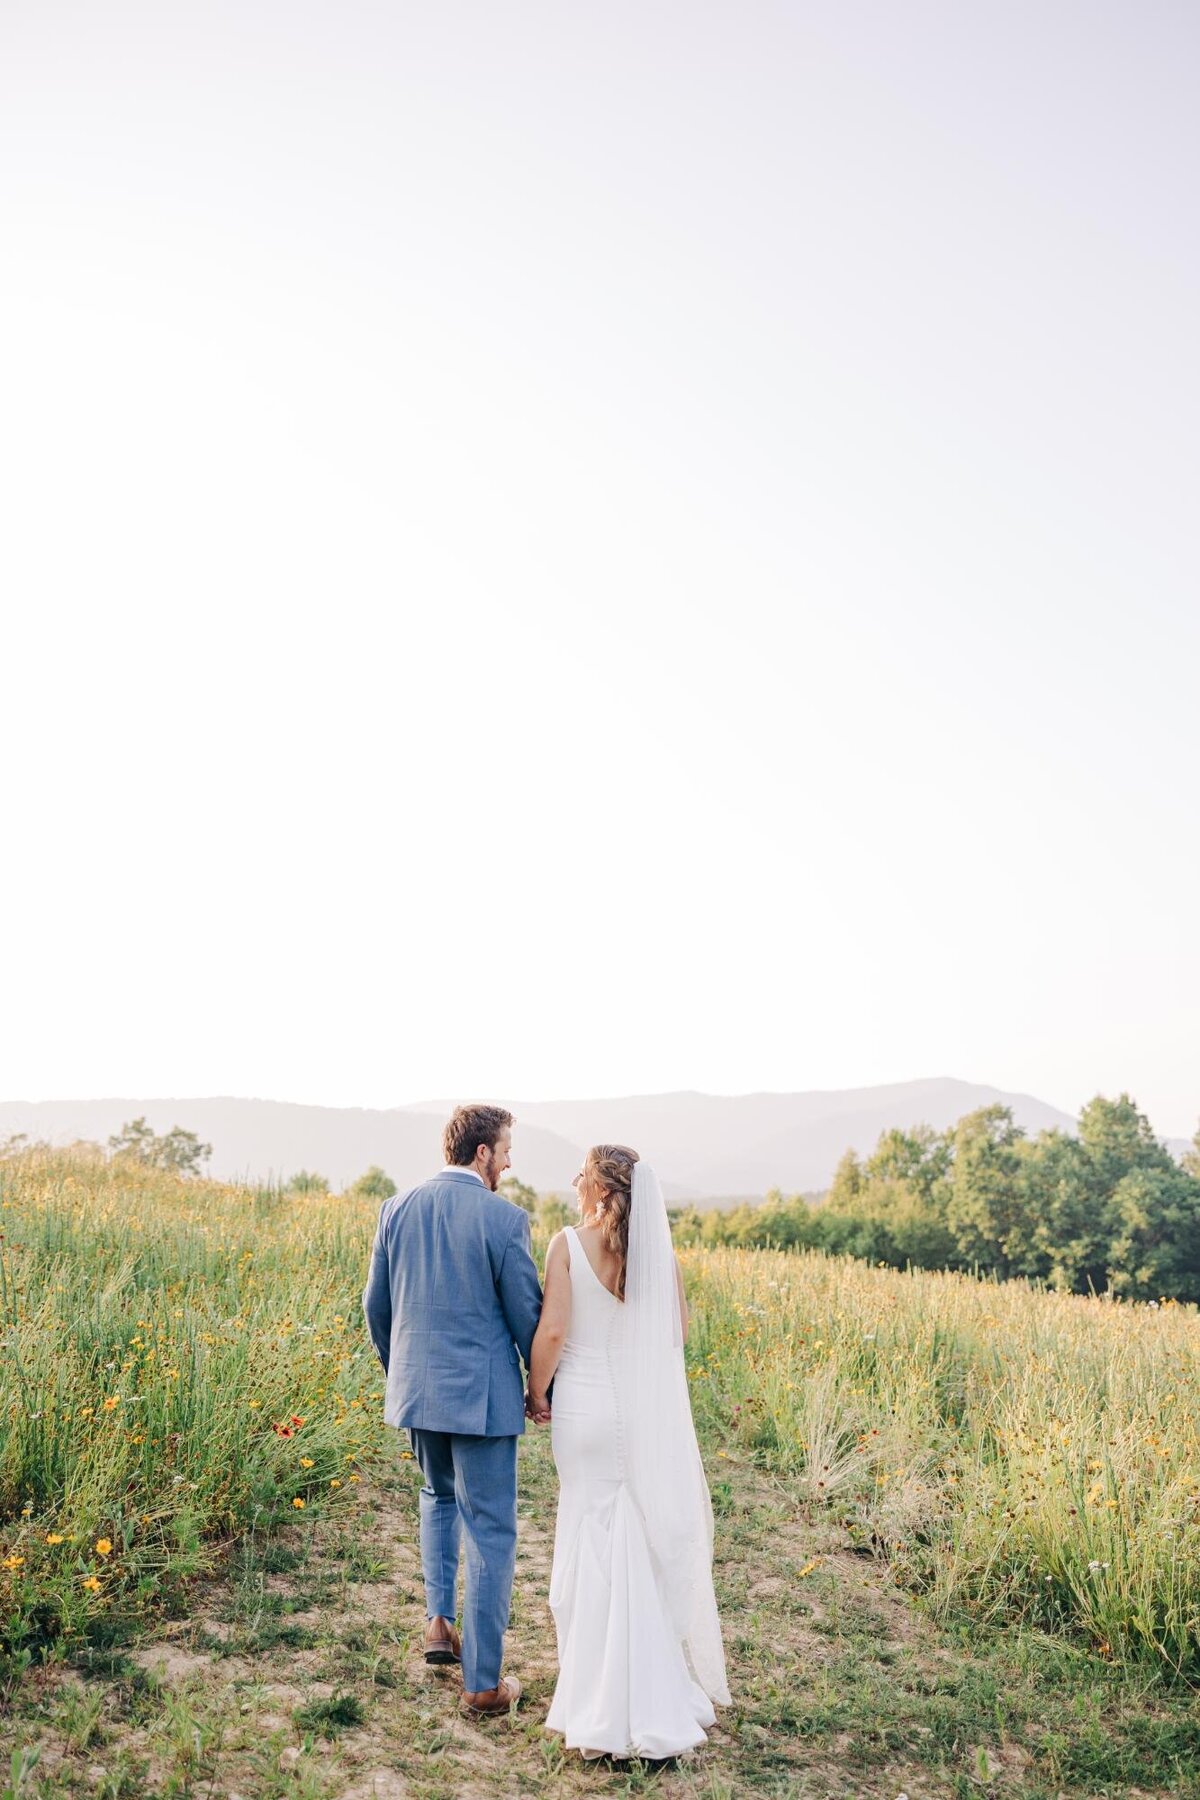 A couple in wedding attire holding hands while walking through a field with a mountainous backdrop.